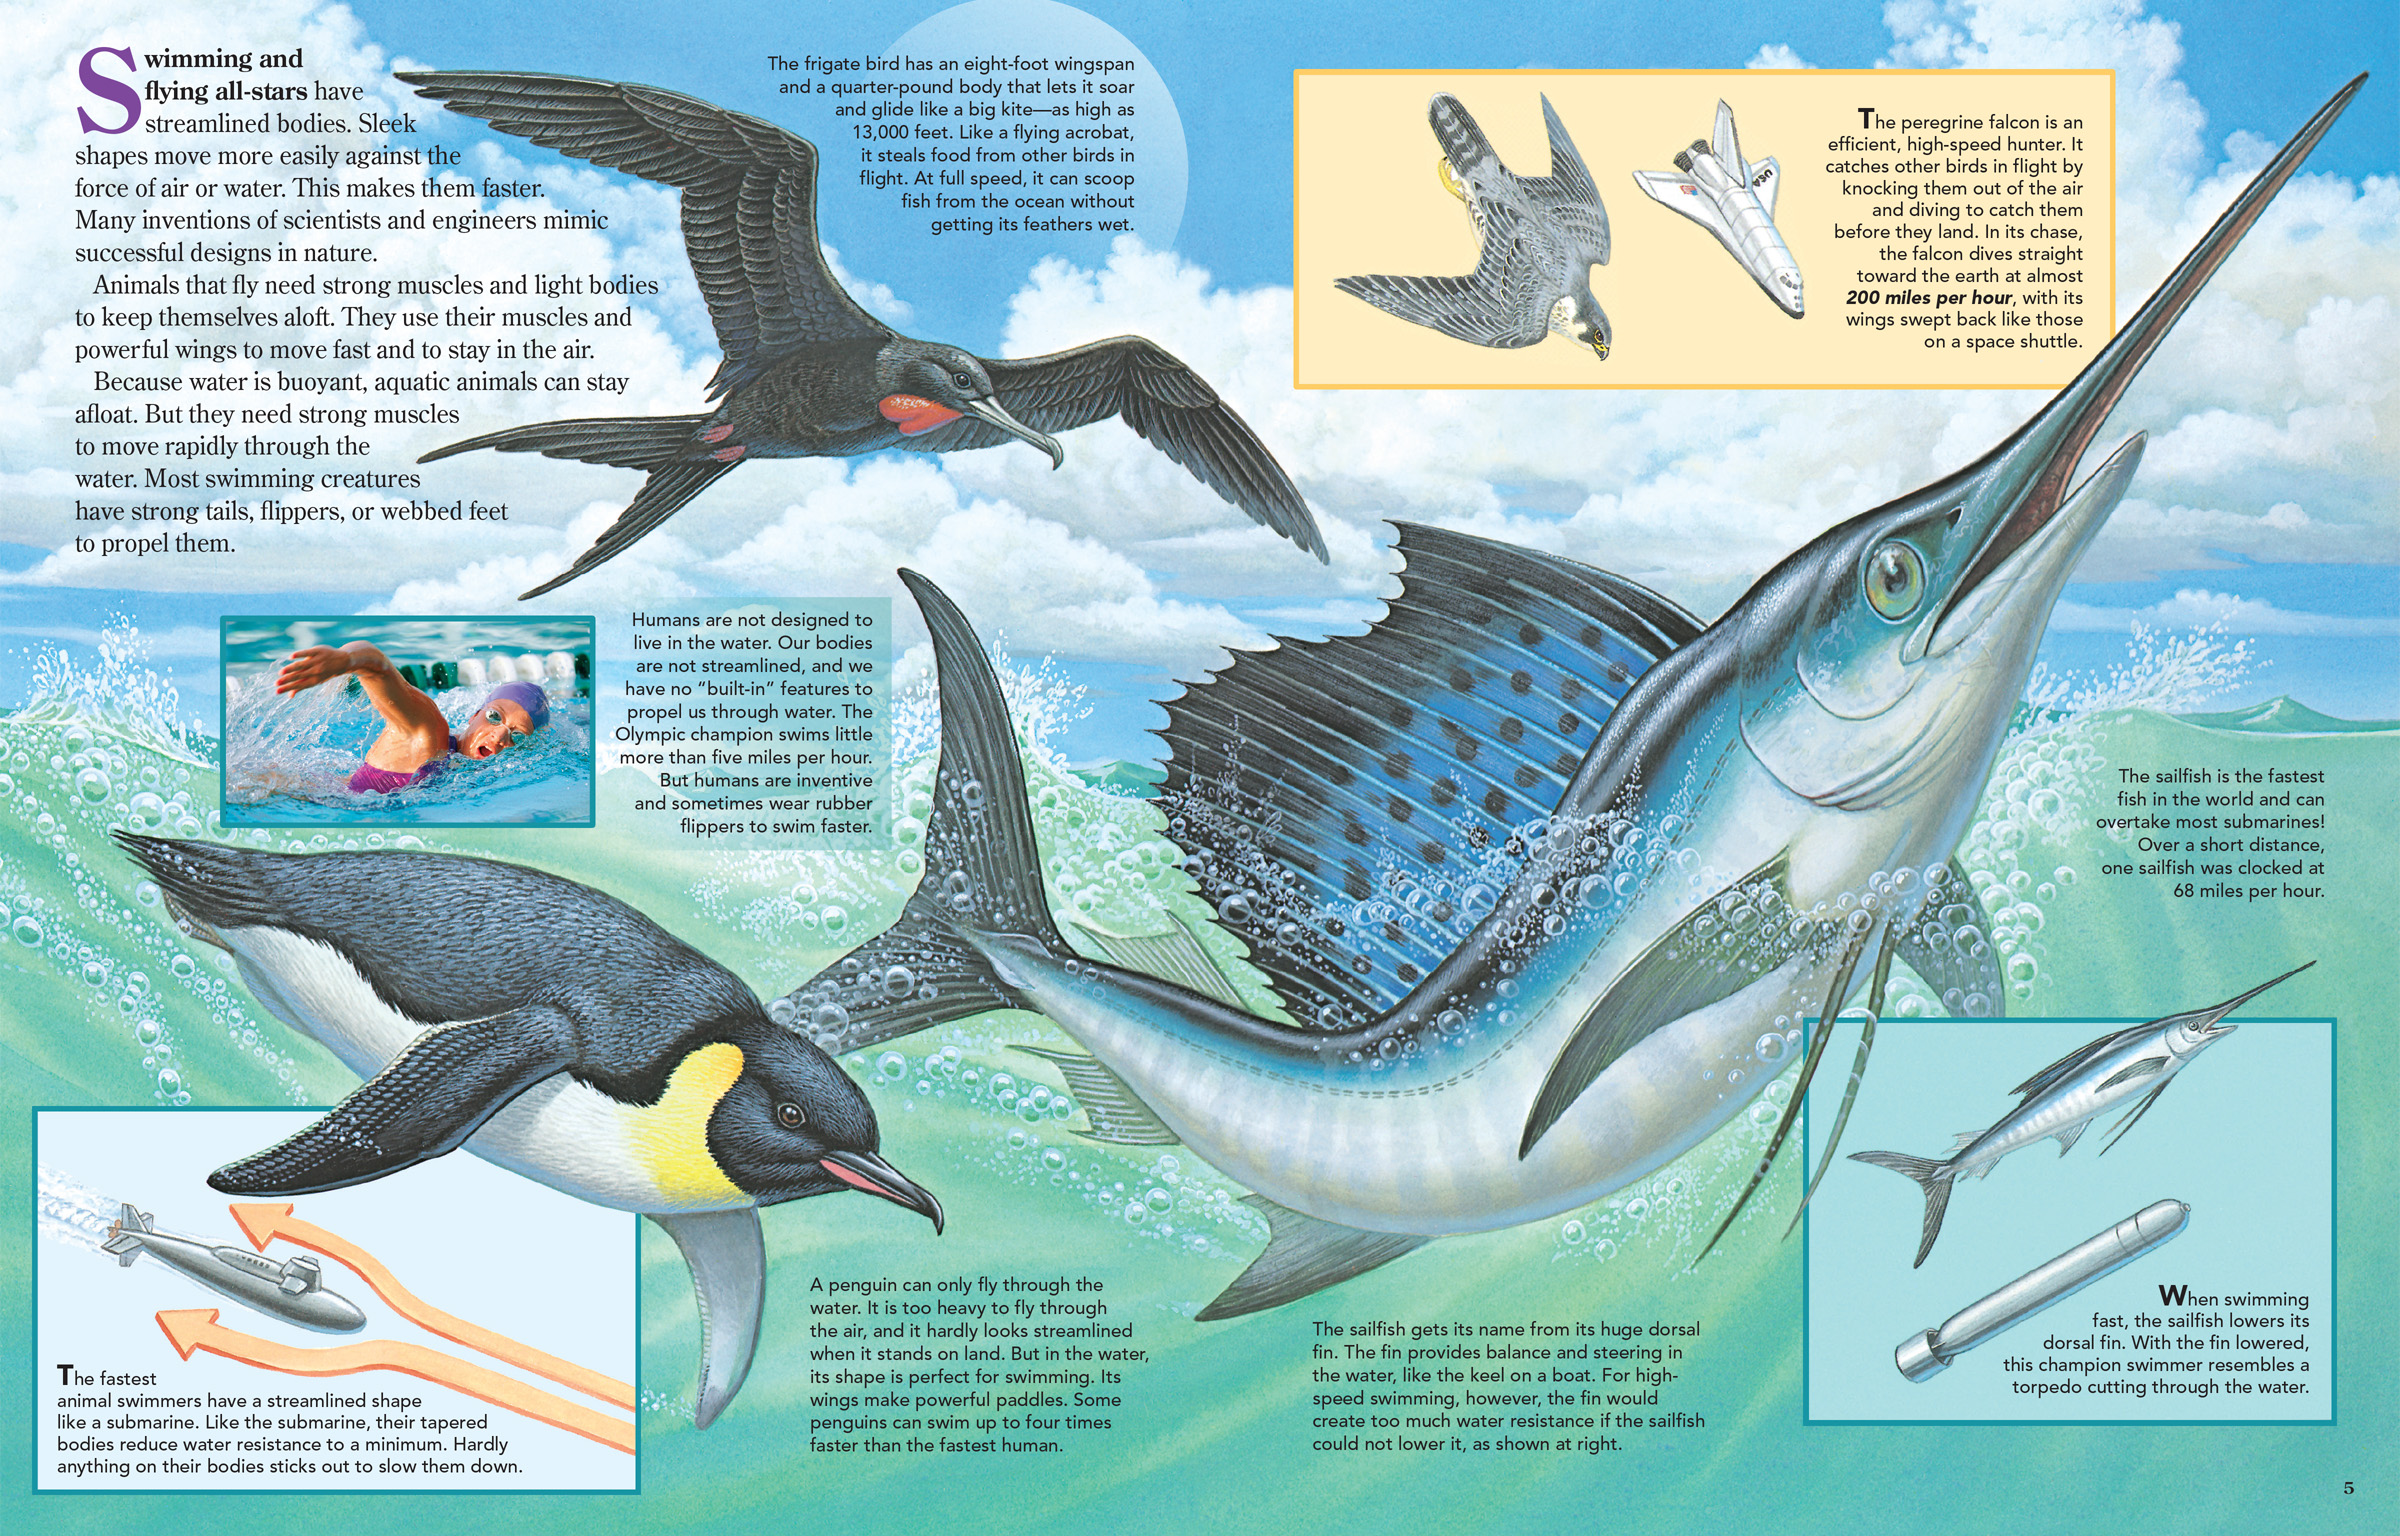 Shows sailfish, penguin, frigatebird and peregrine falcon demonstrating speed in the air and water.